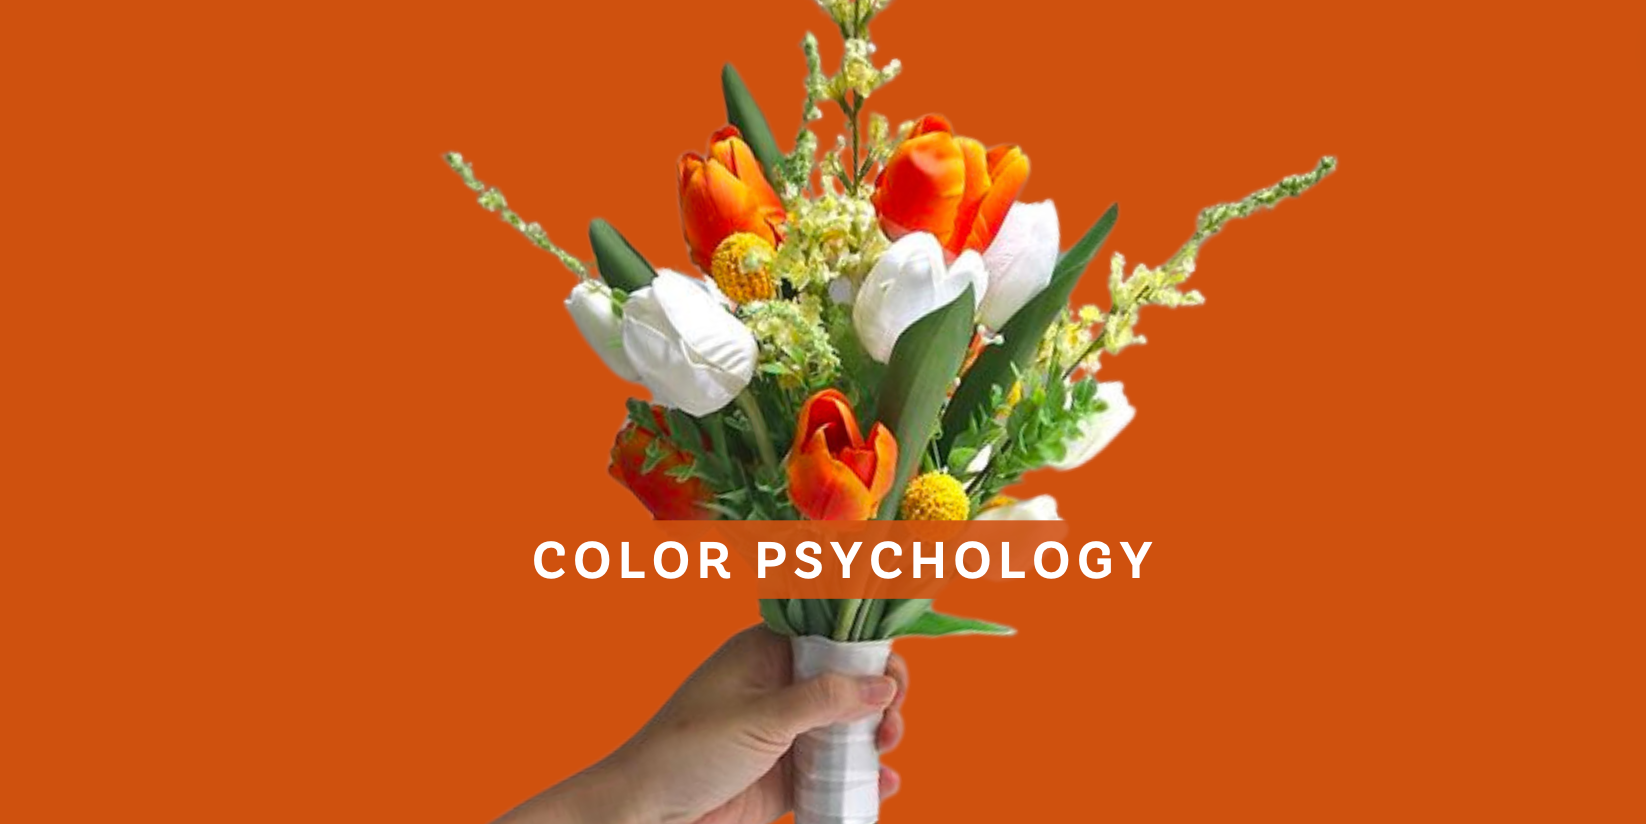 Hue Choose - Color Psychology with Flowers